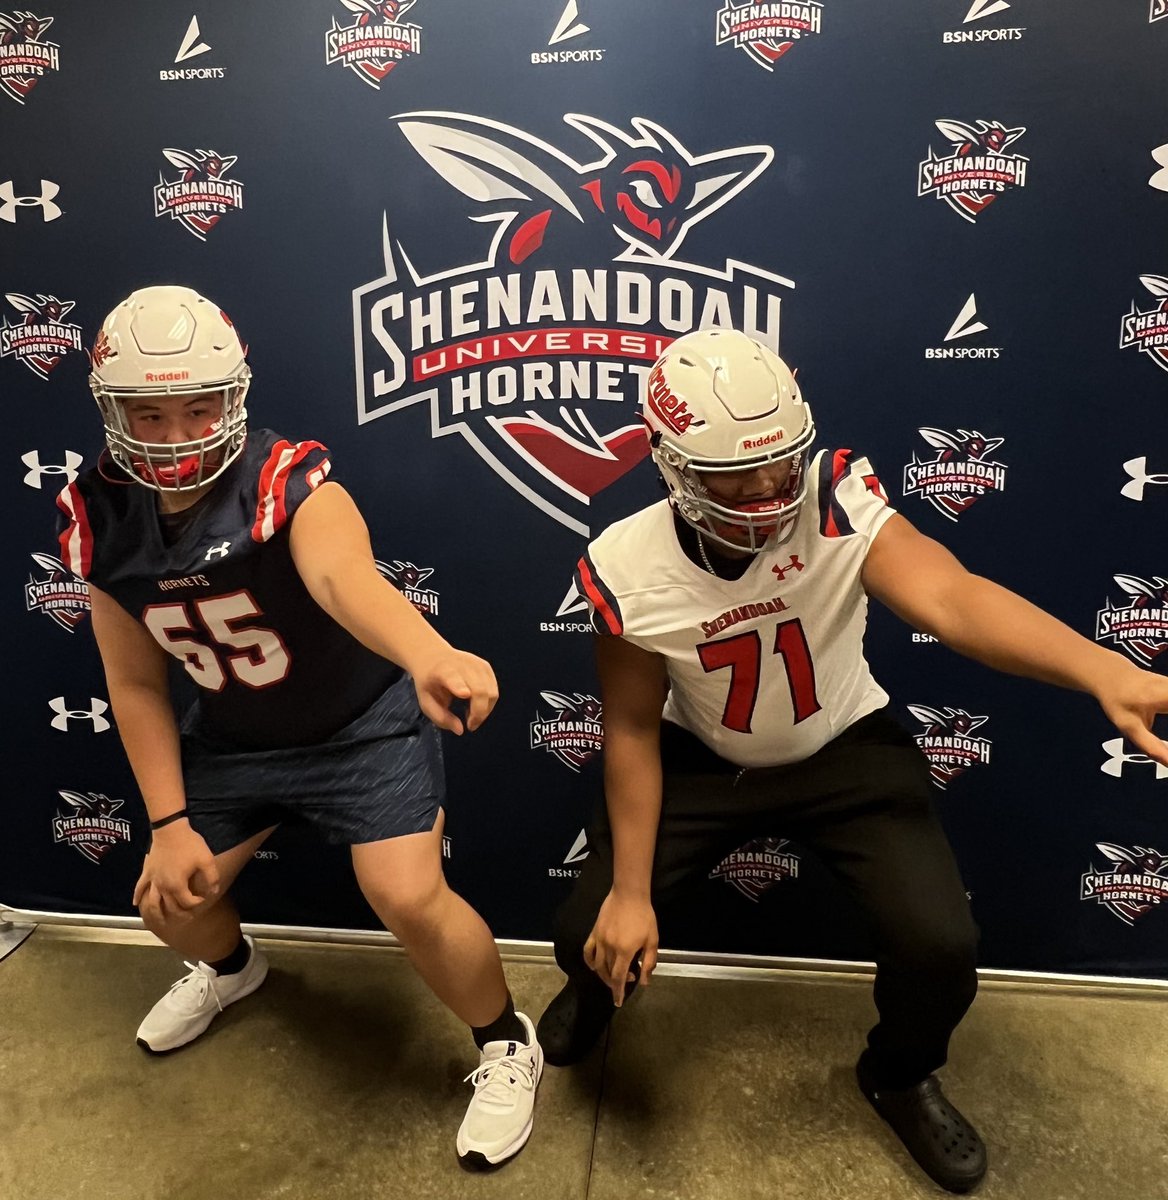 After many phone calls, Game-day visits, and Junior days, I have decided that the best decision for me is to commit to Shenandoah University! To all the coaches who spent their time with me I thank you greatly, but for now I can confidently say I am a Shenandoah Hornet!!!